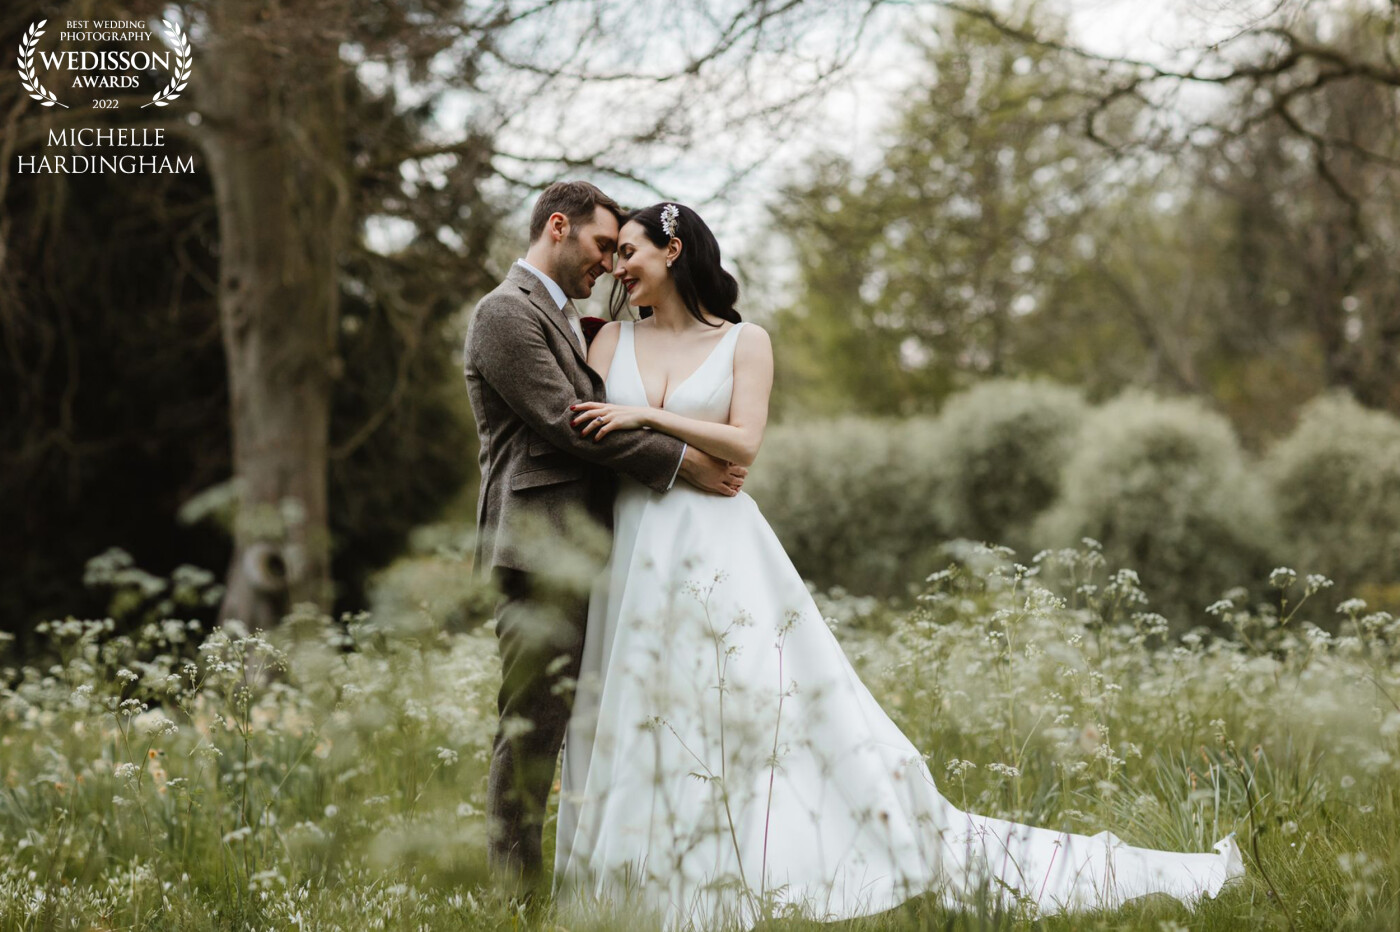 Katy and James will forever my English country Garden dream wedding. Beautiful classic Hollywood vibe in the raw setting of Chippenham Park.